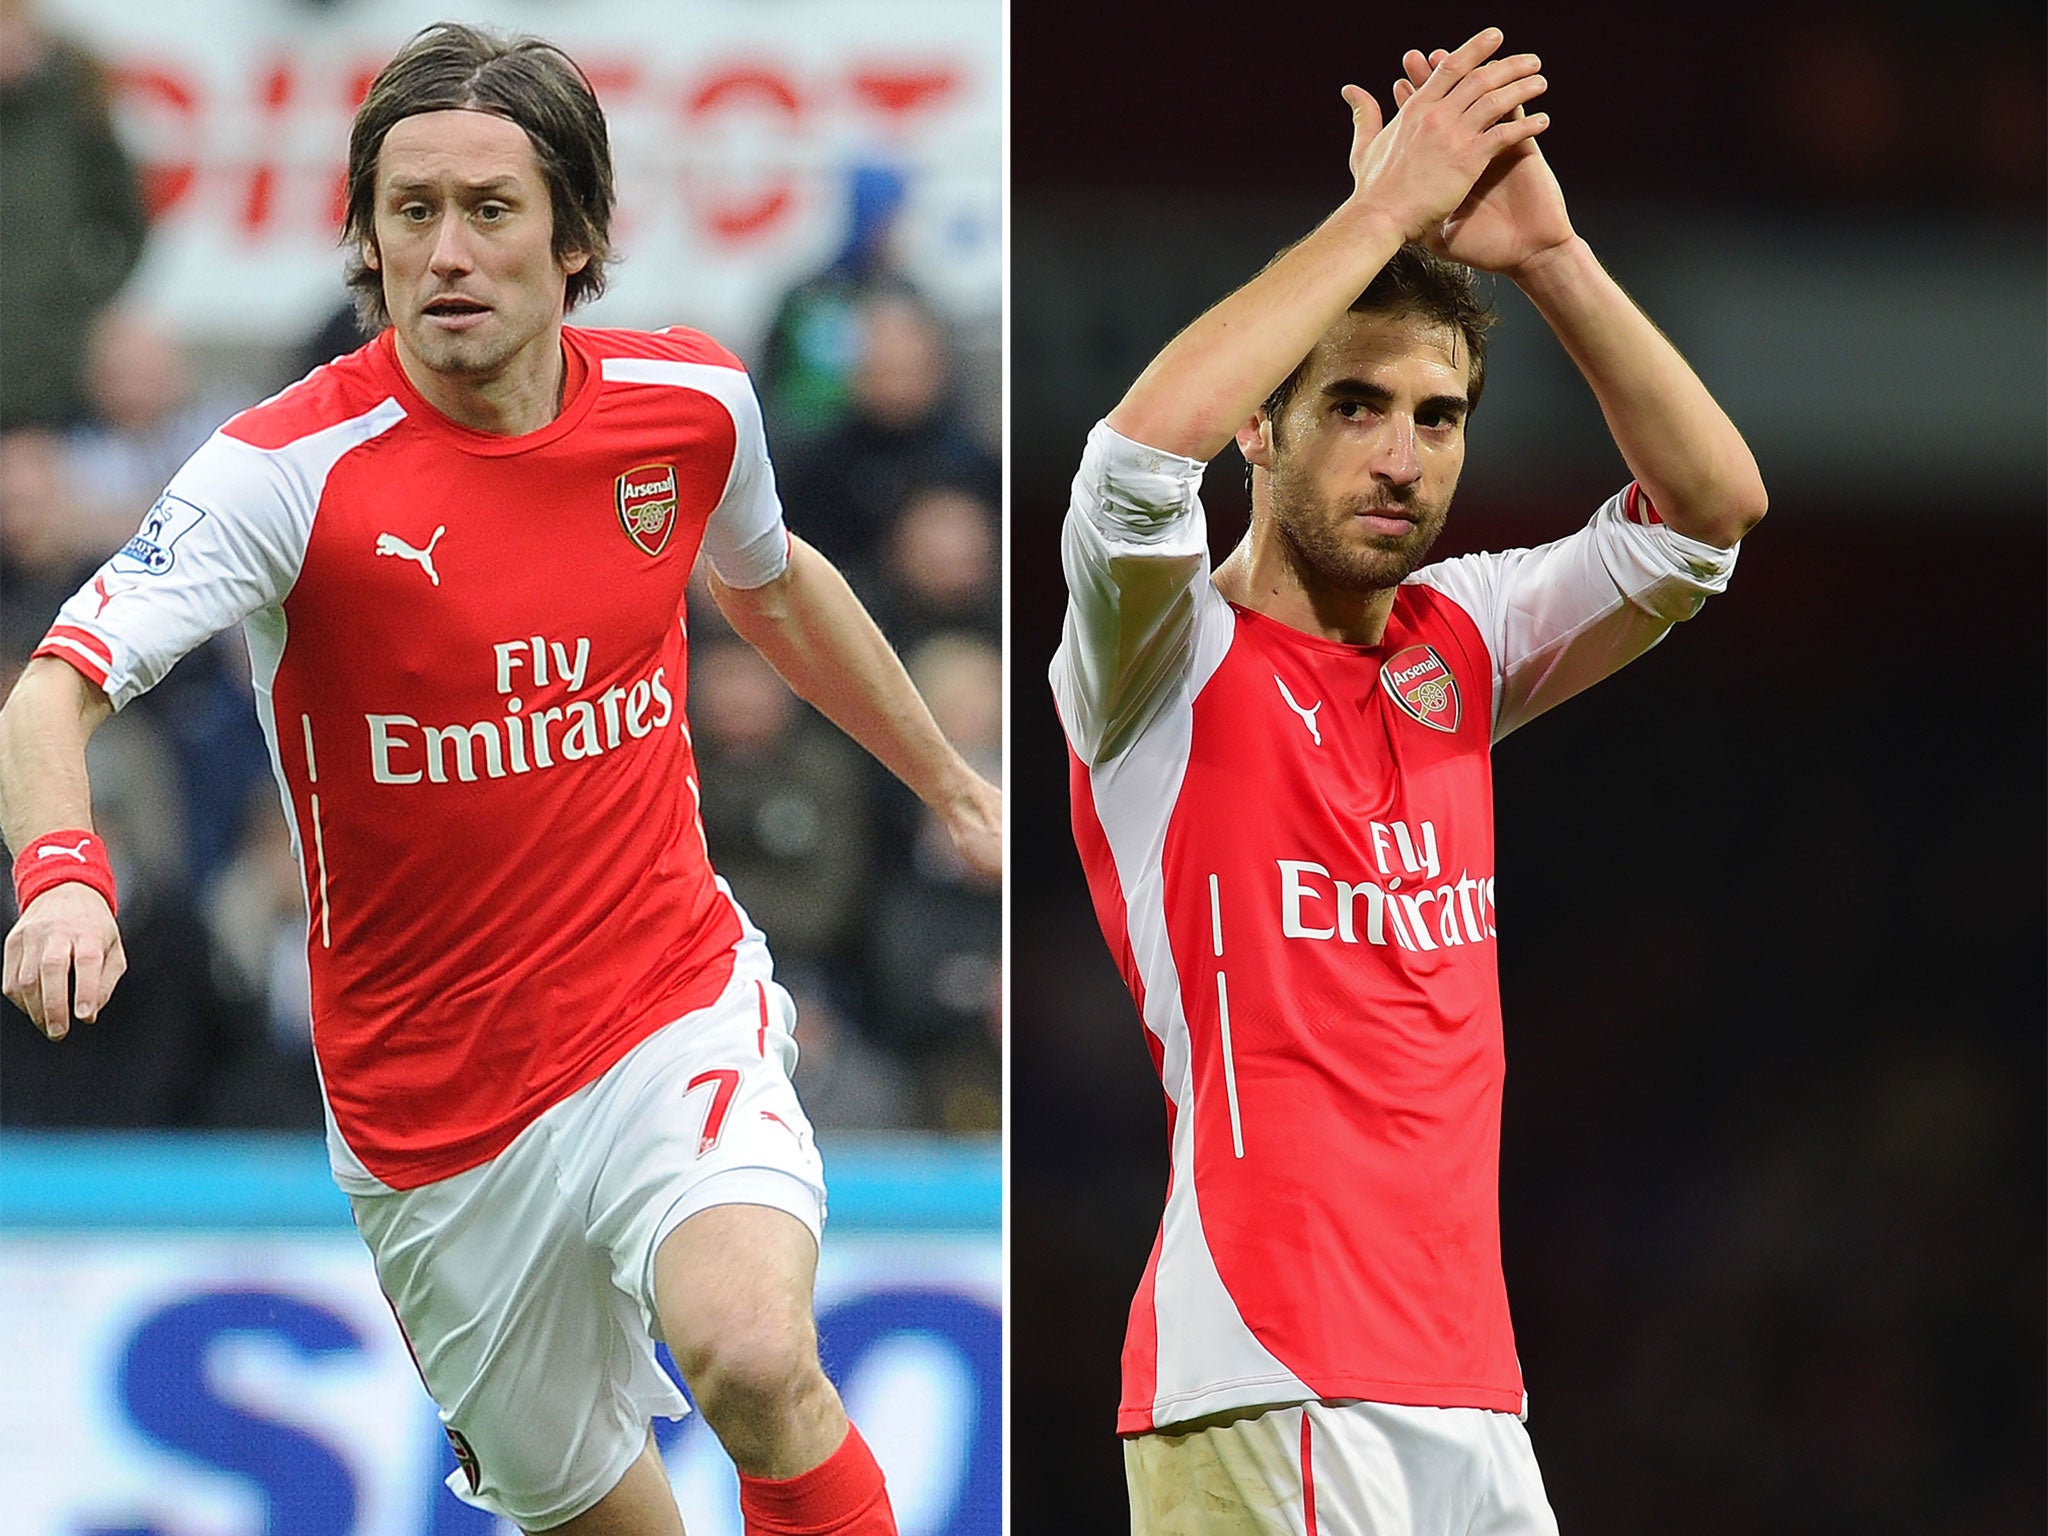 Tomas Rosicky and Mathieu Flamini could leave Arsenal this summer